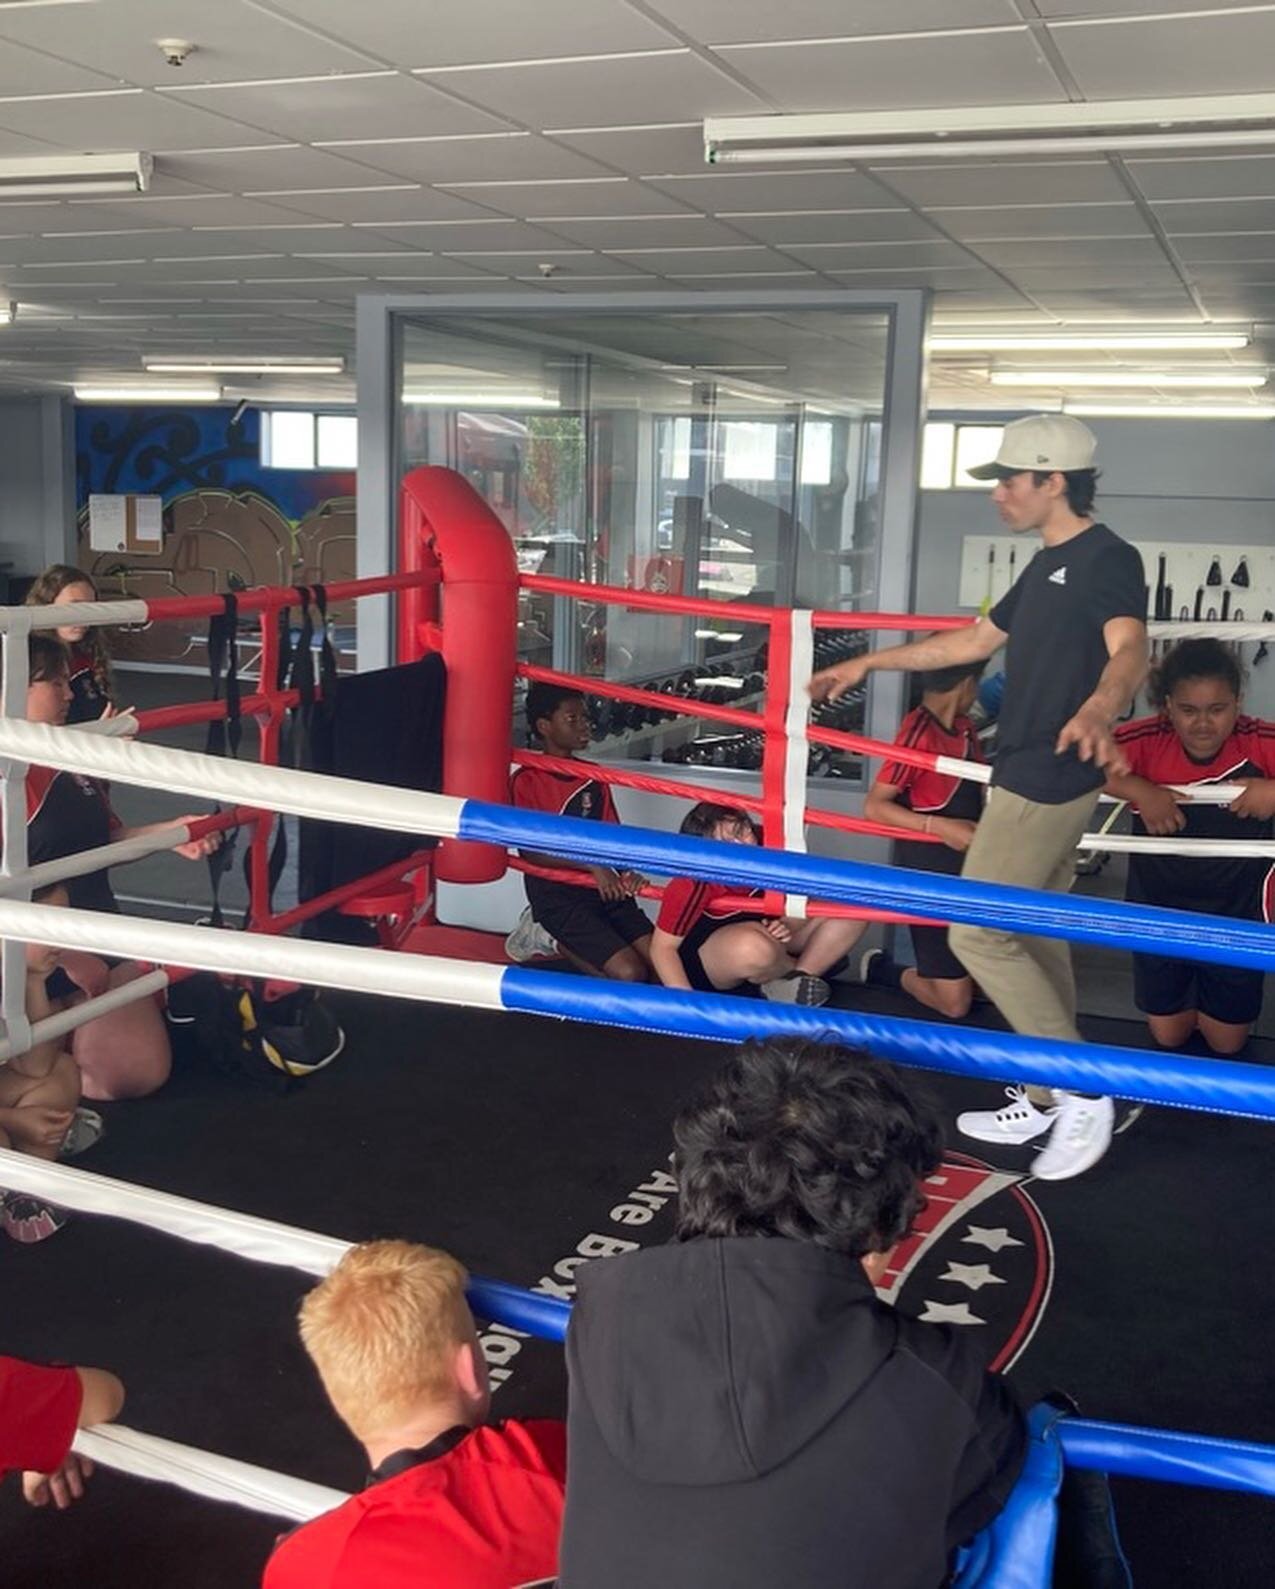 Coach Ratahi putting rangatahi from Dunedin North Intermediate through some boxing in which was a 4 day programme. We&rsquo;d like to thank Salote for the opportunity to teach these kids some skills from our beloved sport 🥊👊🏾